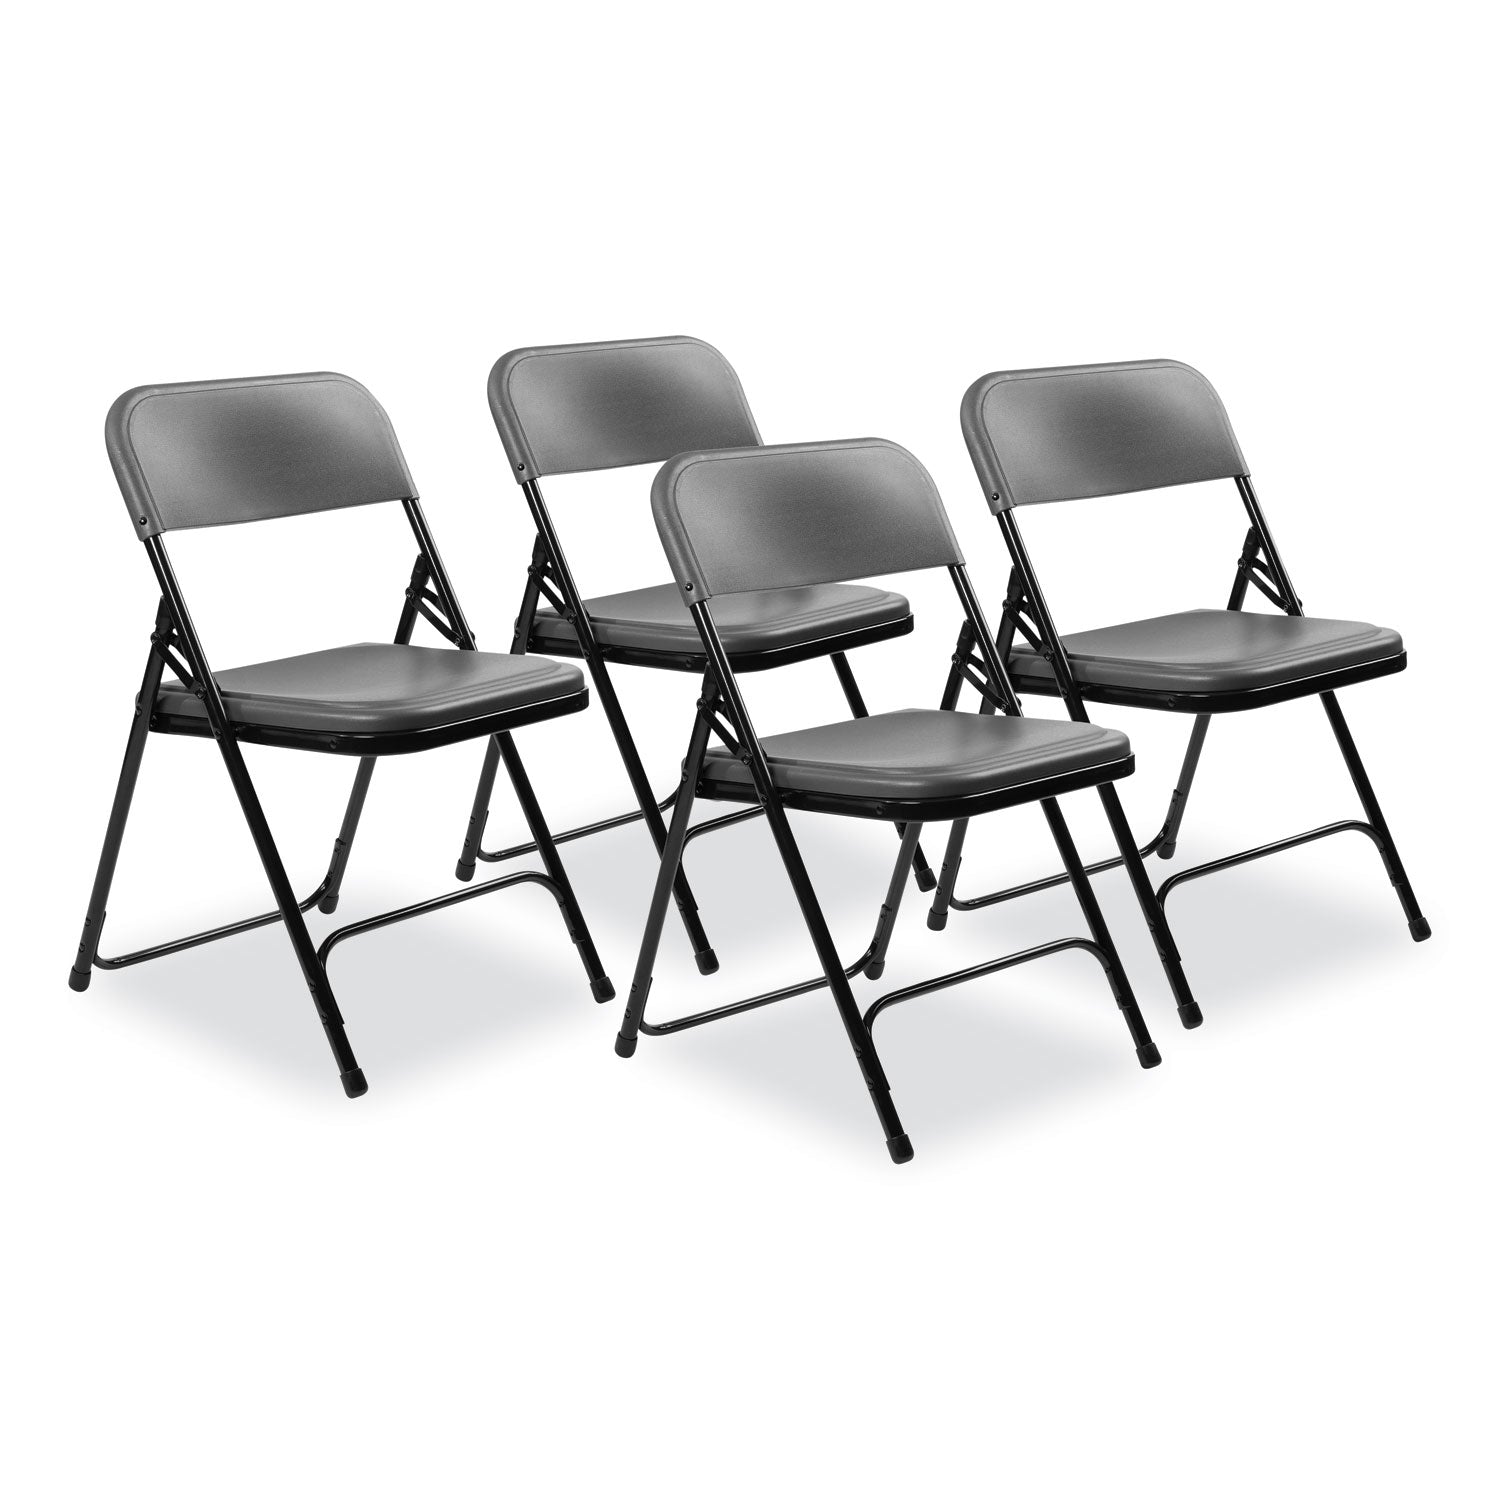 800-series-plastic-folding-chair-supports-500-lb-18-seat-ht-charcoal-seat-back-black-base-4-ct-ships-in-1-3-bus-days_nps820 - 1